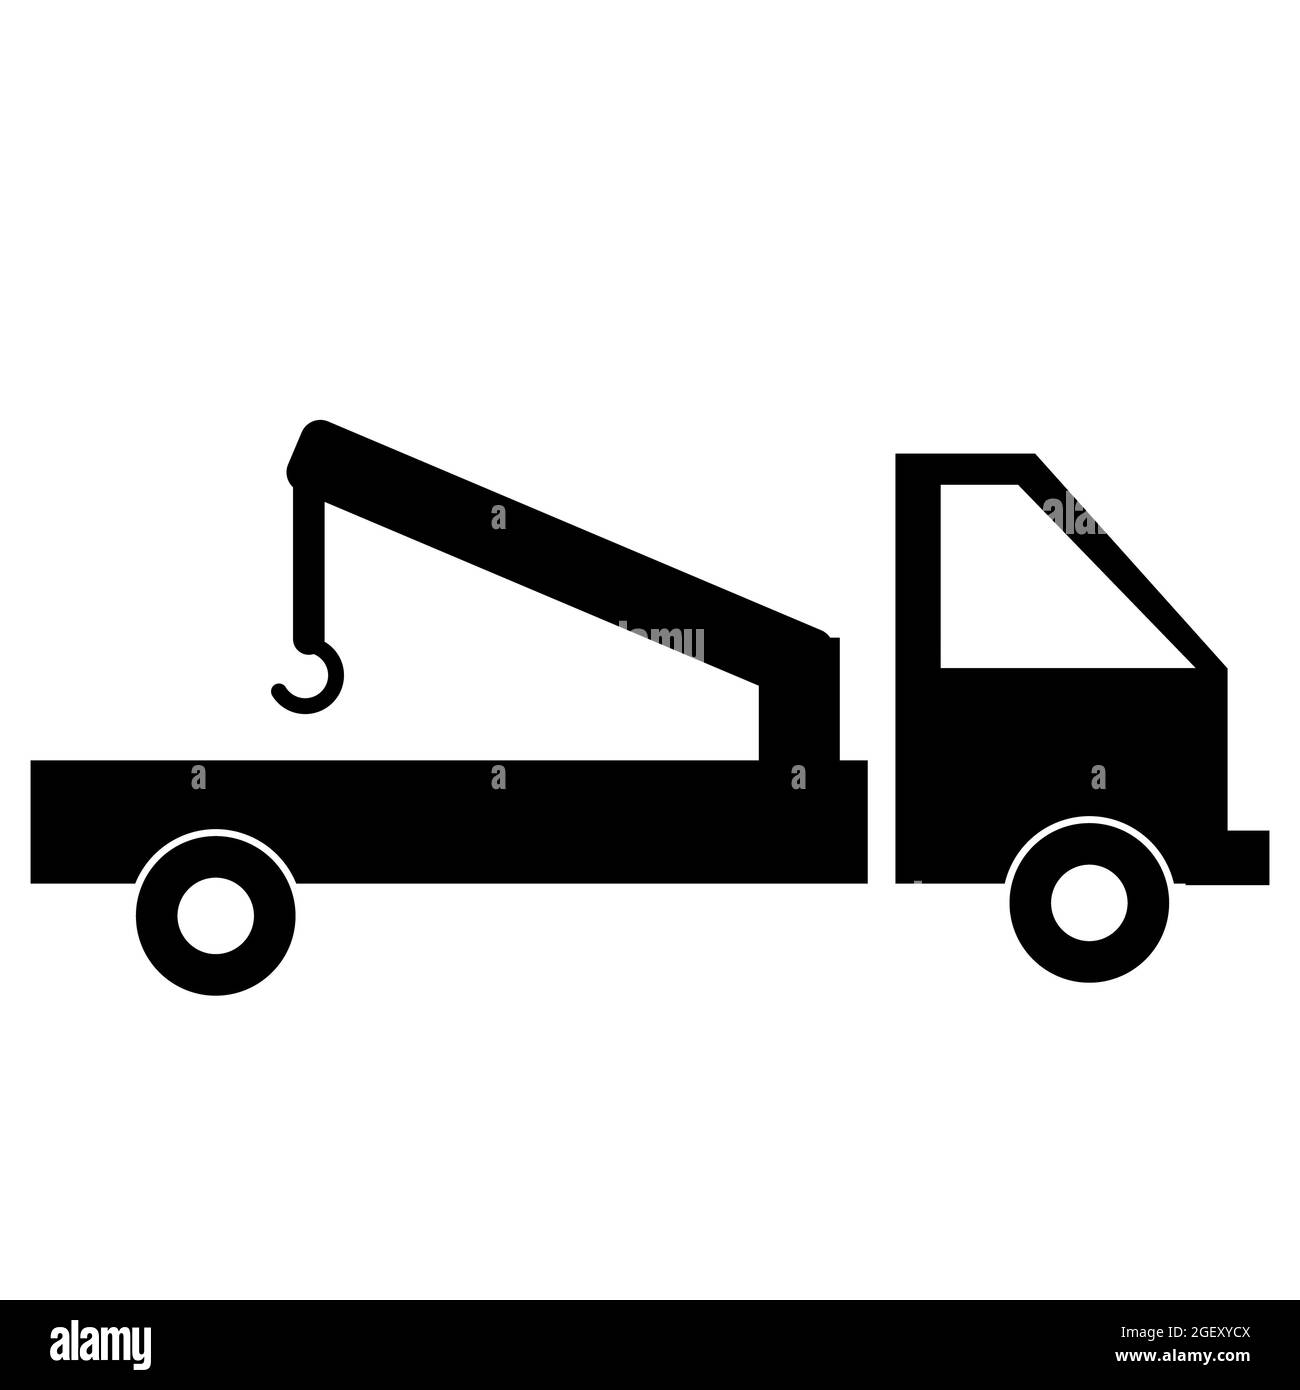 tow truck icon on white background. construction machine sign. wrecker truck symbol. flat style. Stock Photo